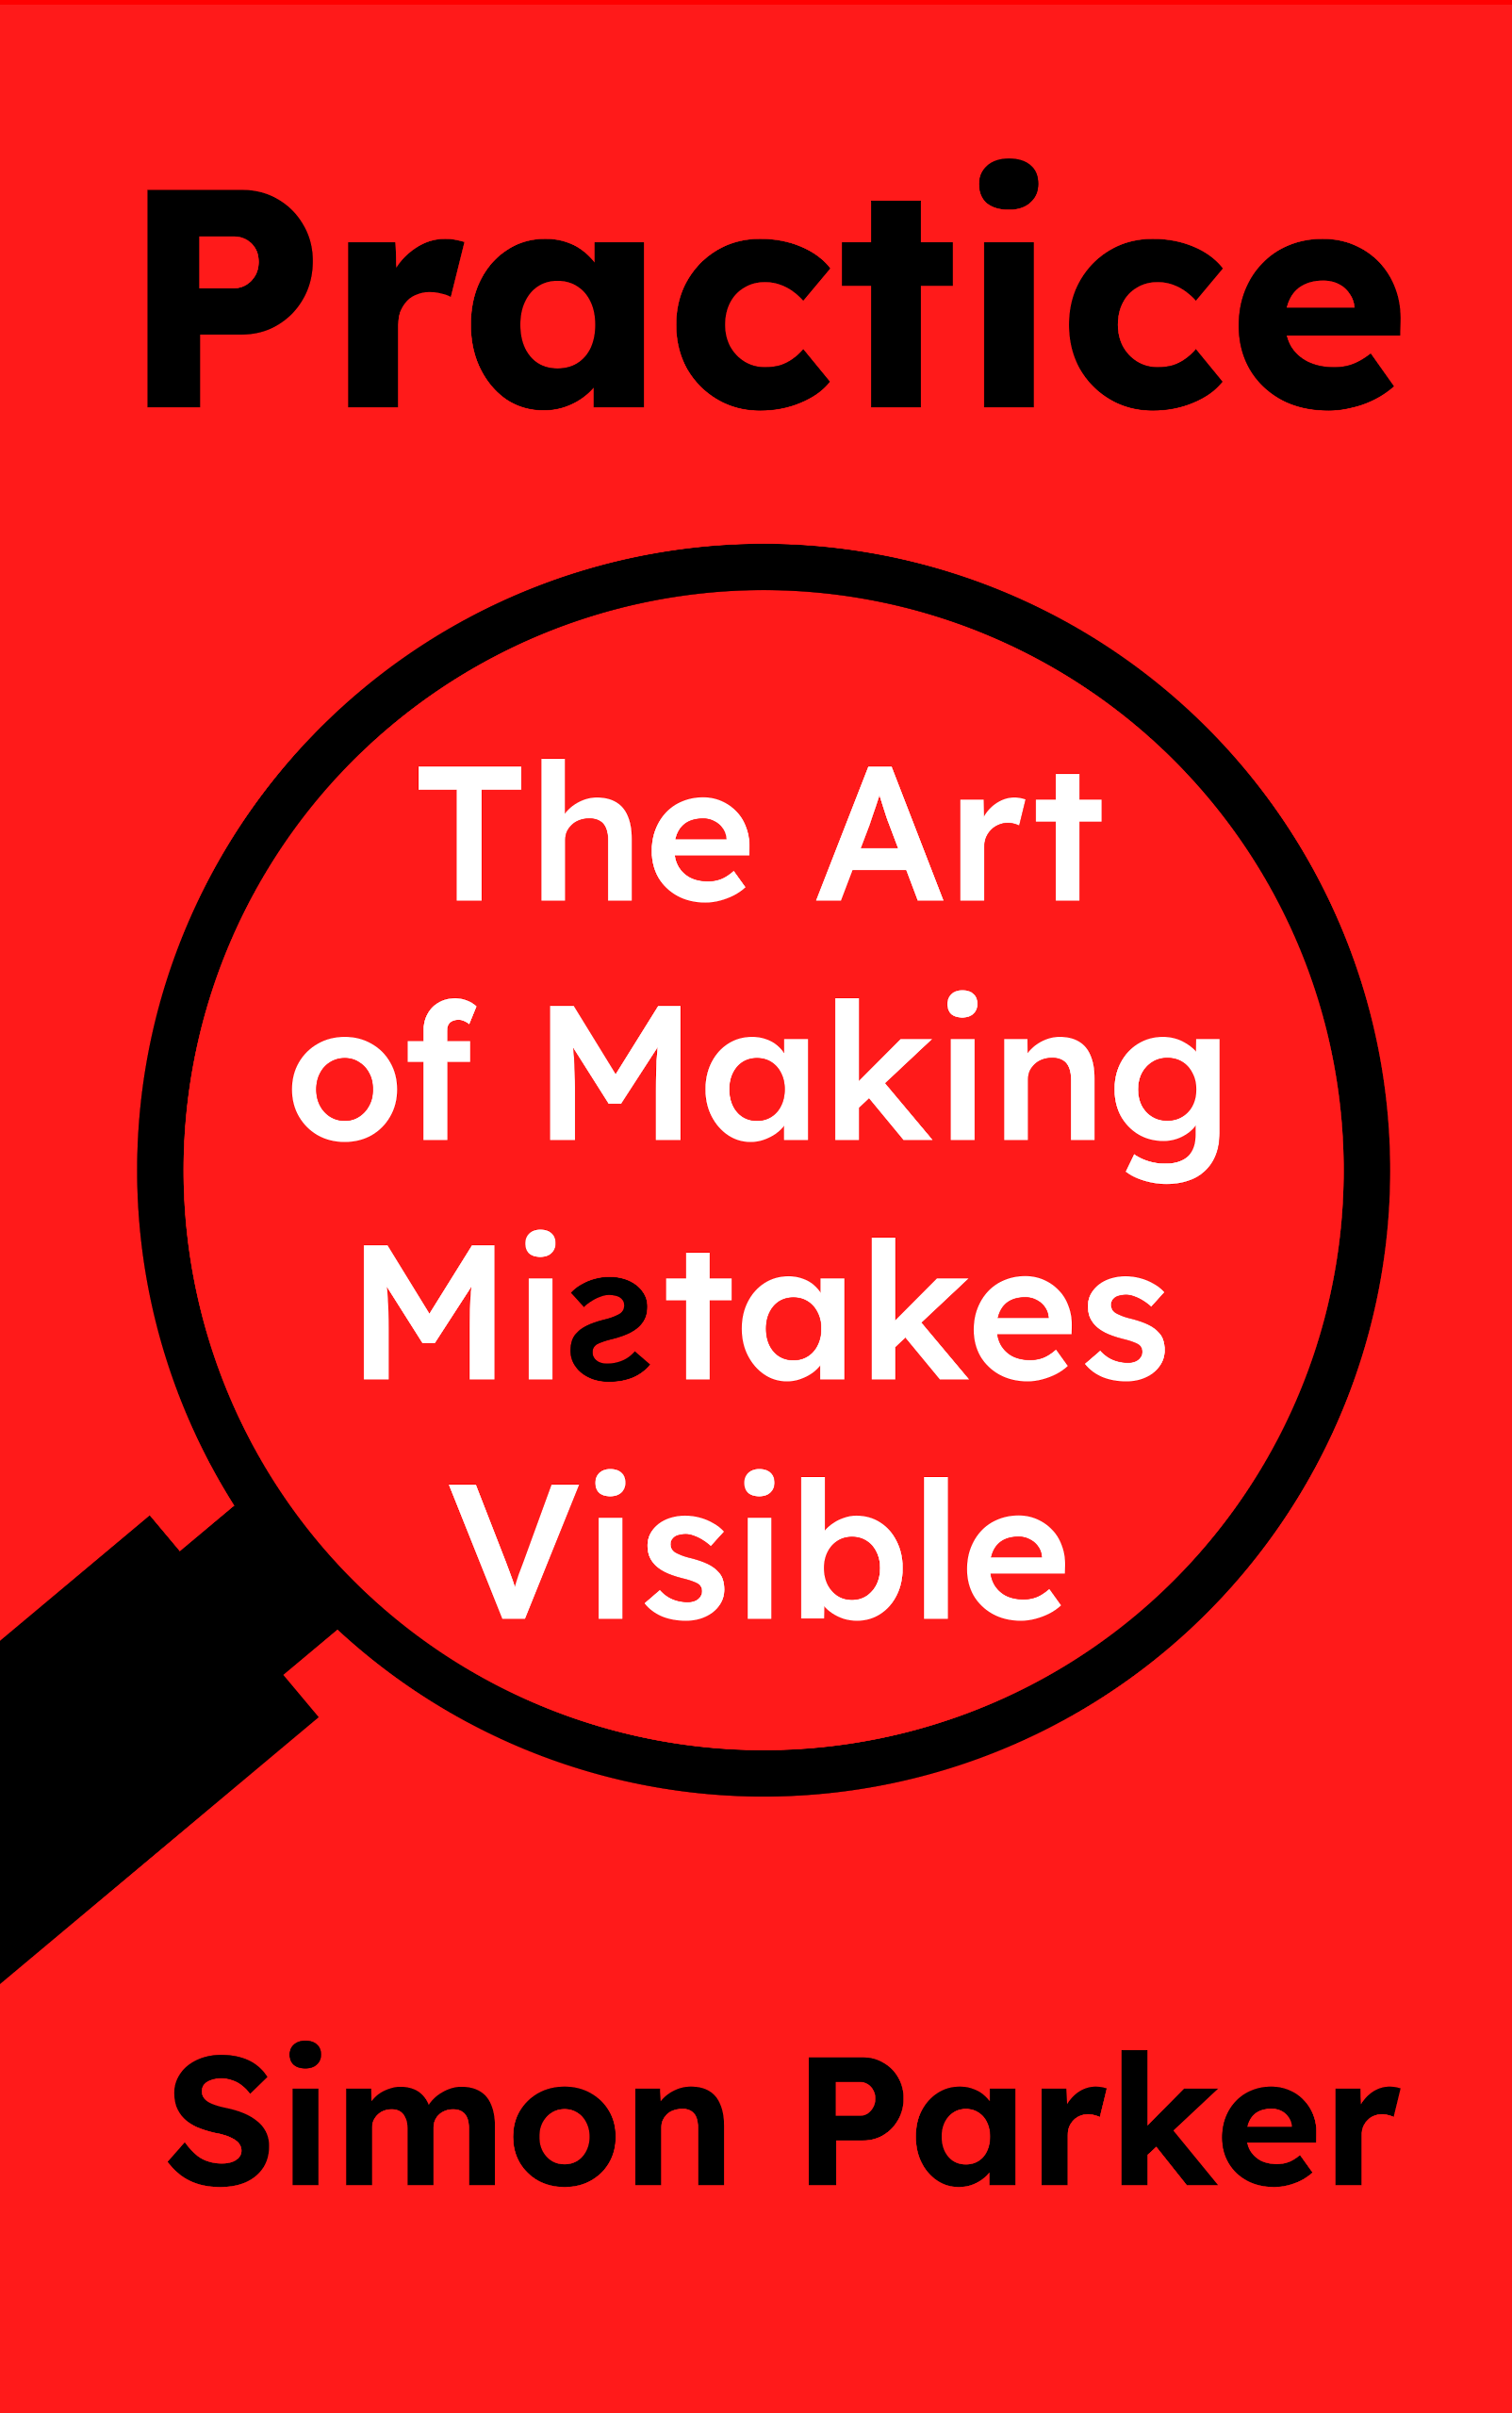 Practice: The Art of Making Mistakes Visible